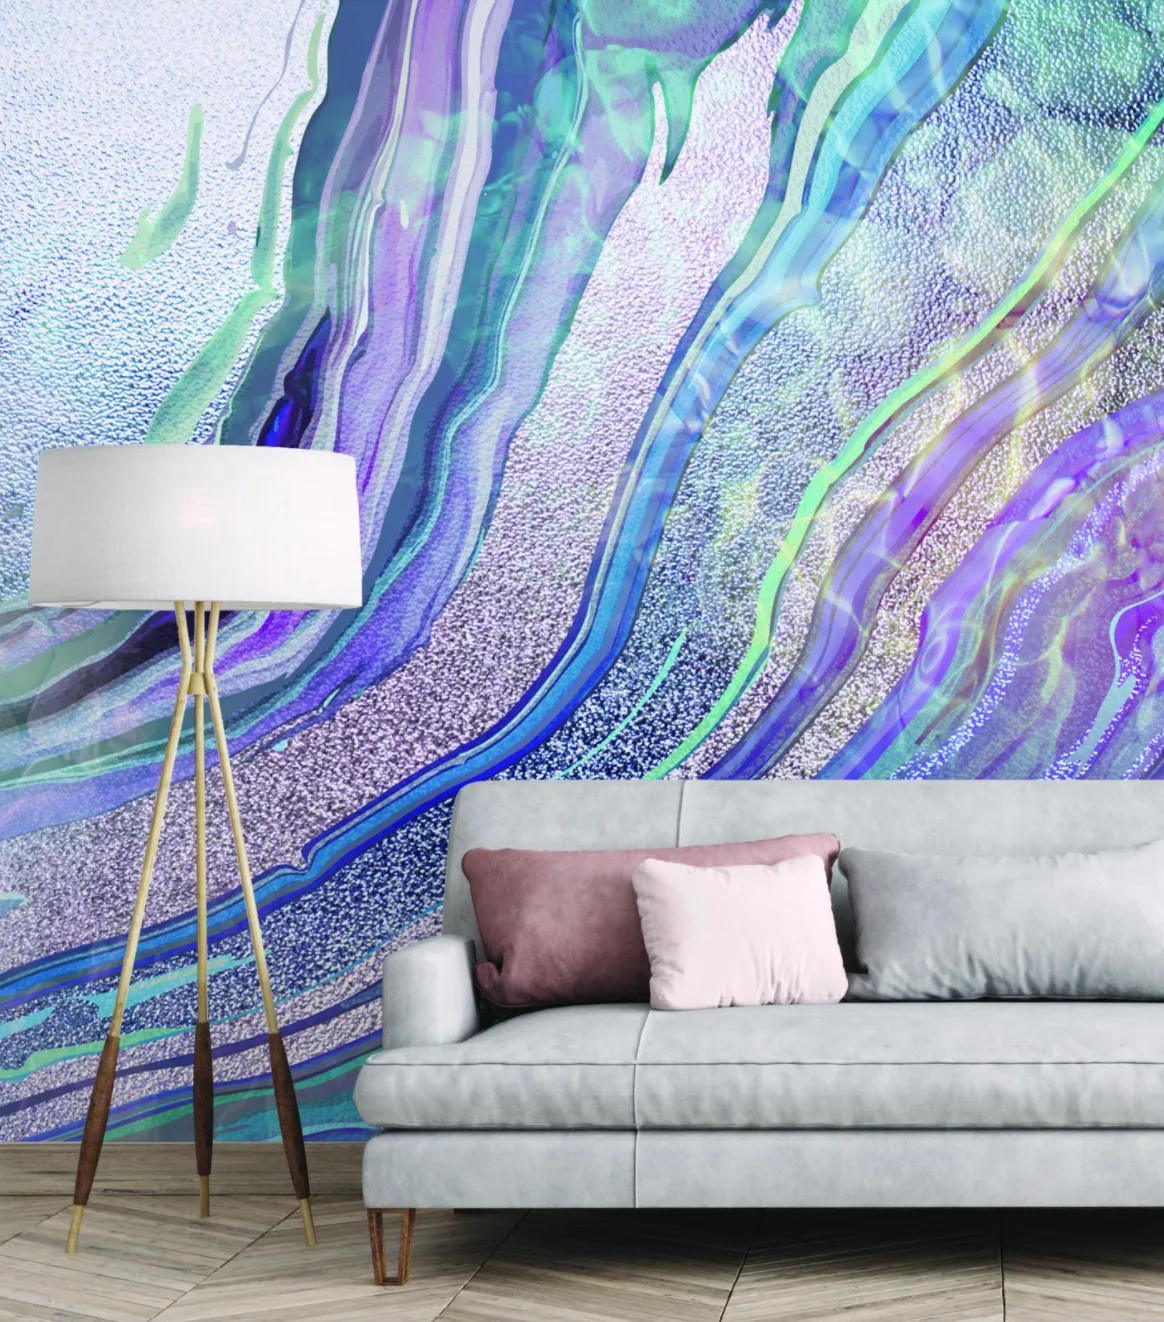 Really embrace this crystalising trend by creating a feature wall with a mural Lilac Ripple wall mural by Lara Skinner, £35 per sq m, Wallsauce